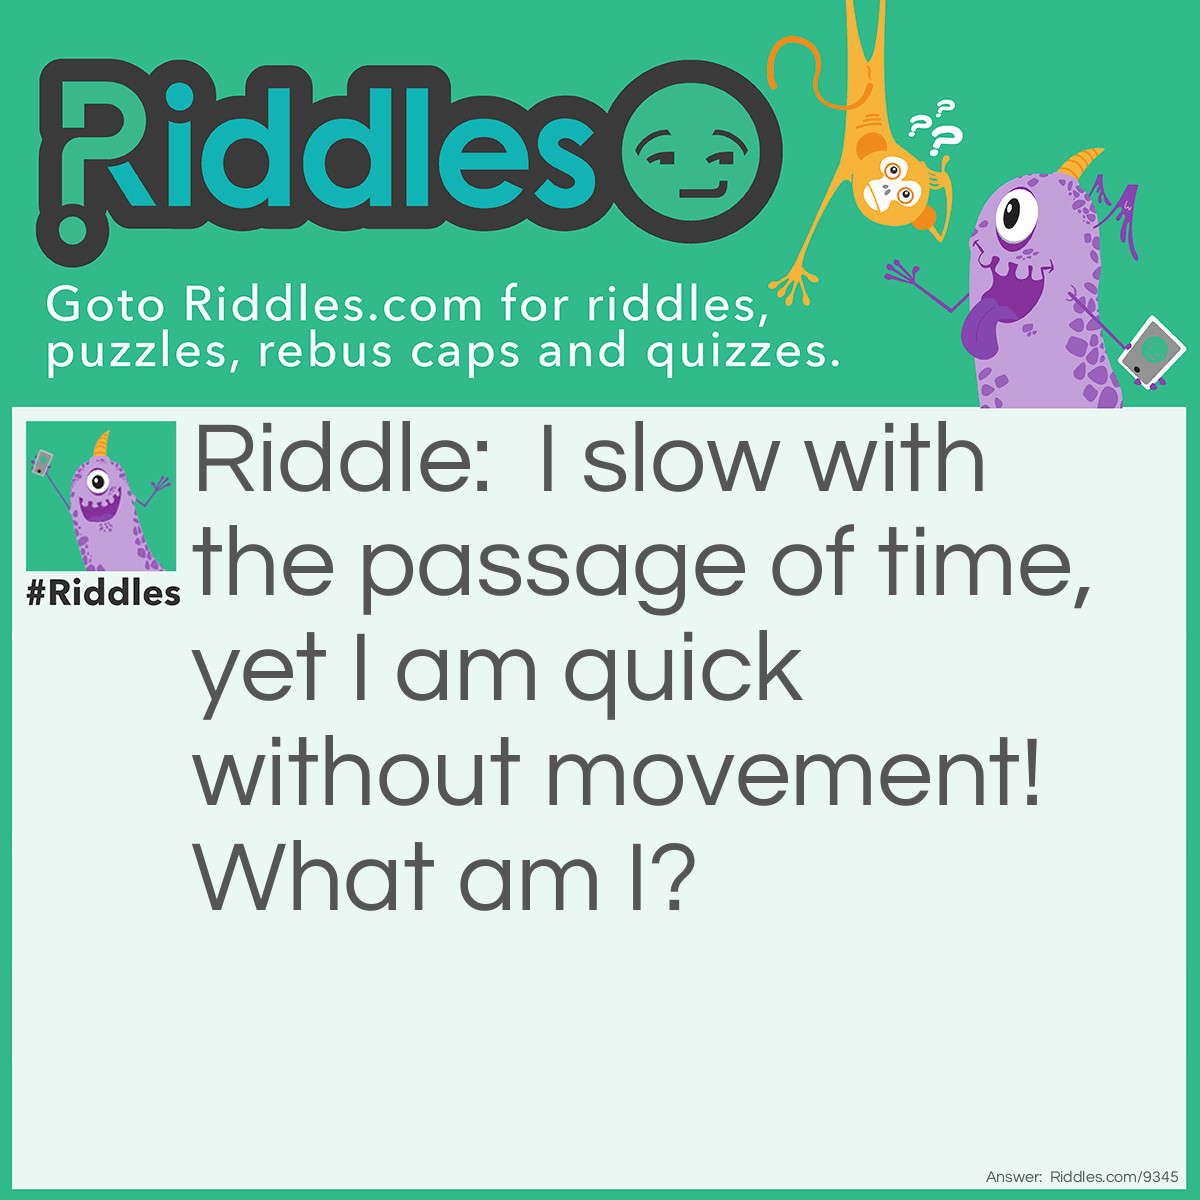 Riddle: I slow with the passage of time, yet I am quick without movement! What am I? Answer: A keen mind.